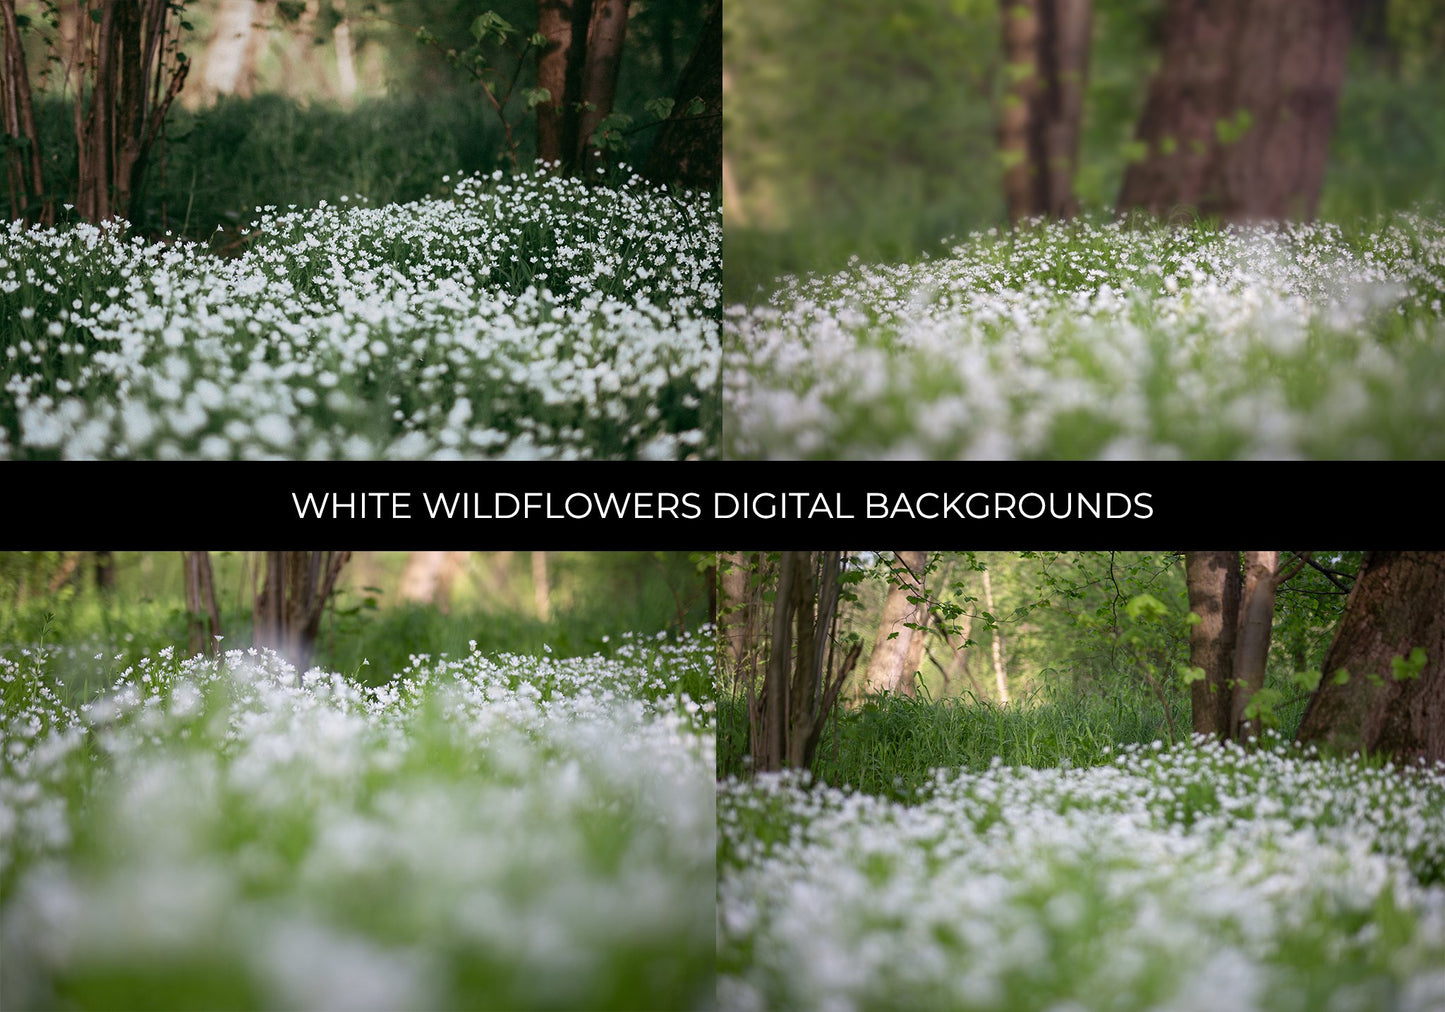 White Wildflowers Composite Photography Set - Photoshop Overlays, Digital Backgrounds and Lightroom Presets